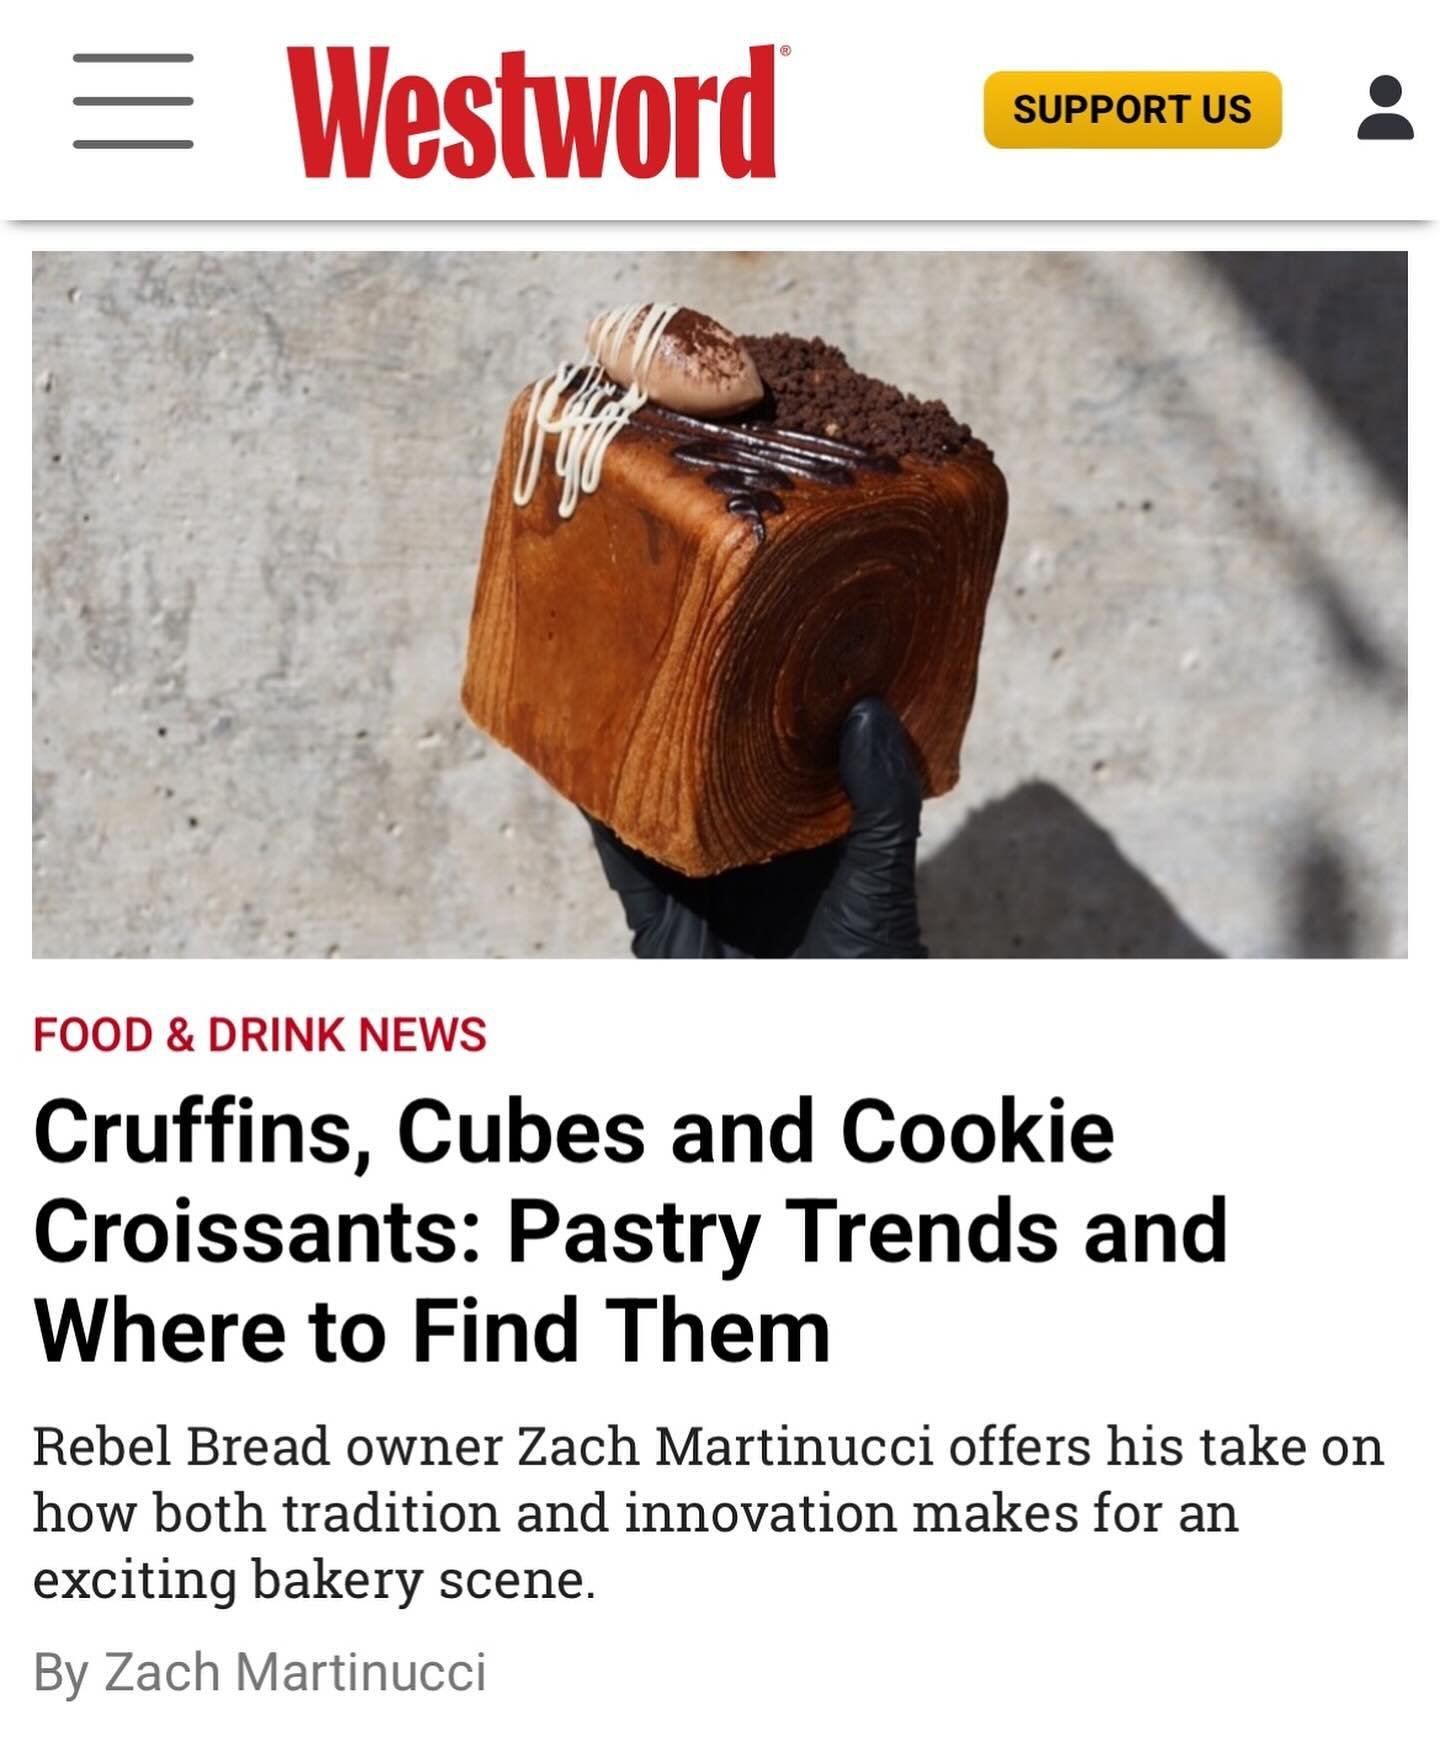 A client byline is the best byline! @zachmartinucci of @rebelbreaddenver is now a @denverwestword author, sharing his hot take on local pastry trends. Thank you @mollydbu for the opportunity! 

So, where *do* you find some amazing and trendy croissan